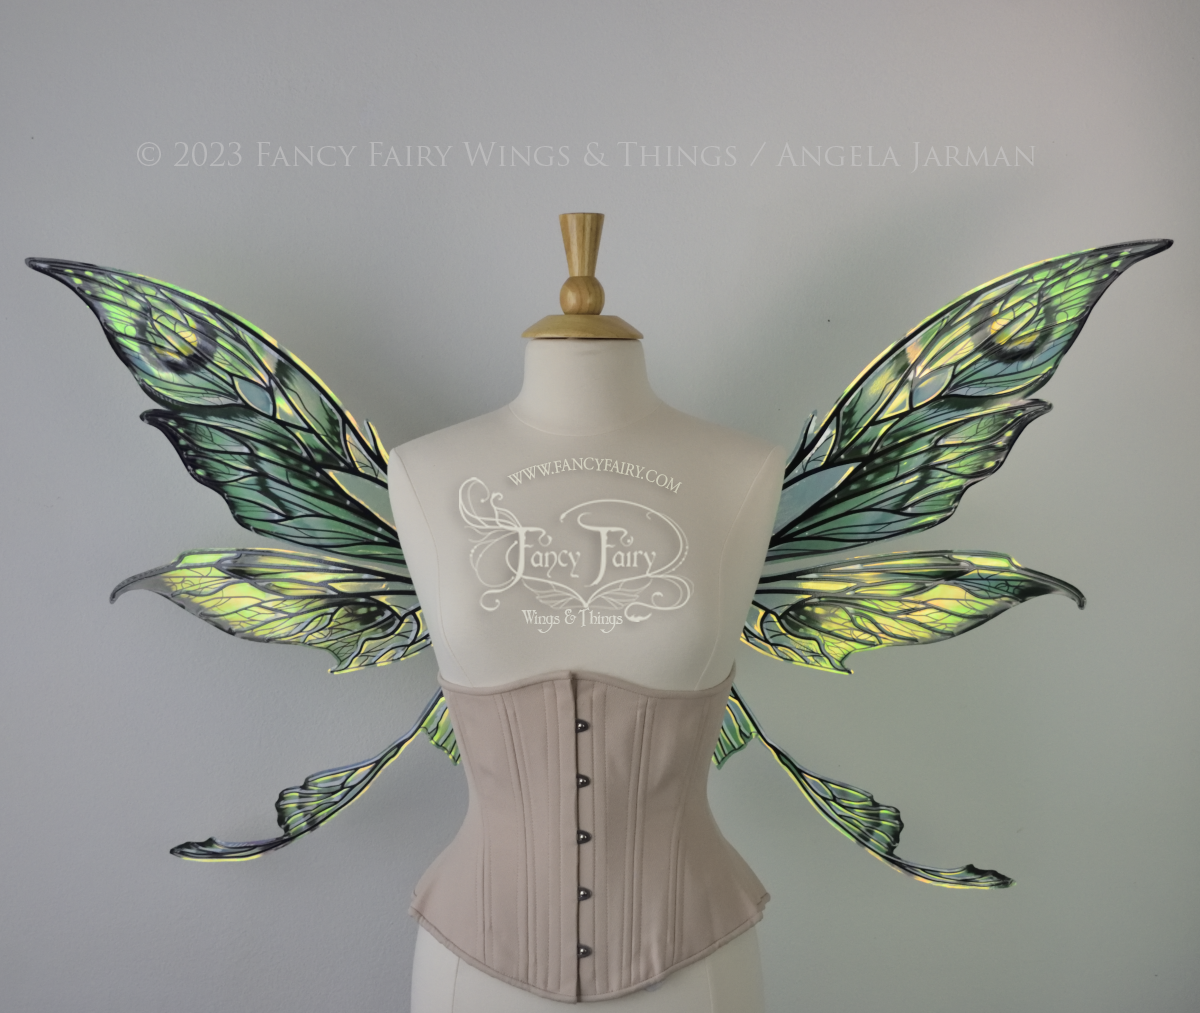 Made-To-Order Colette 'Pix' Convertible Iridescent Fairy Wings with black veins